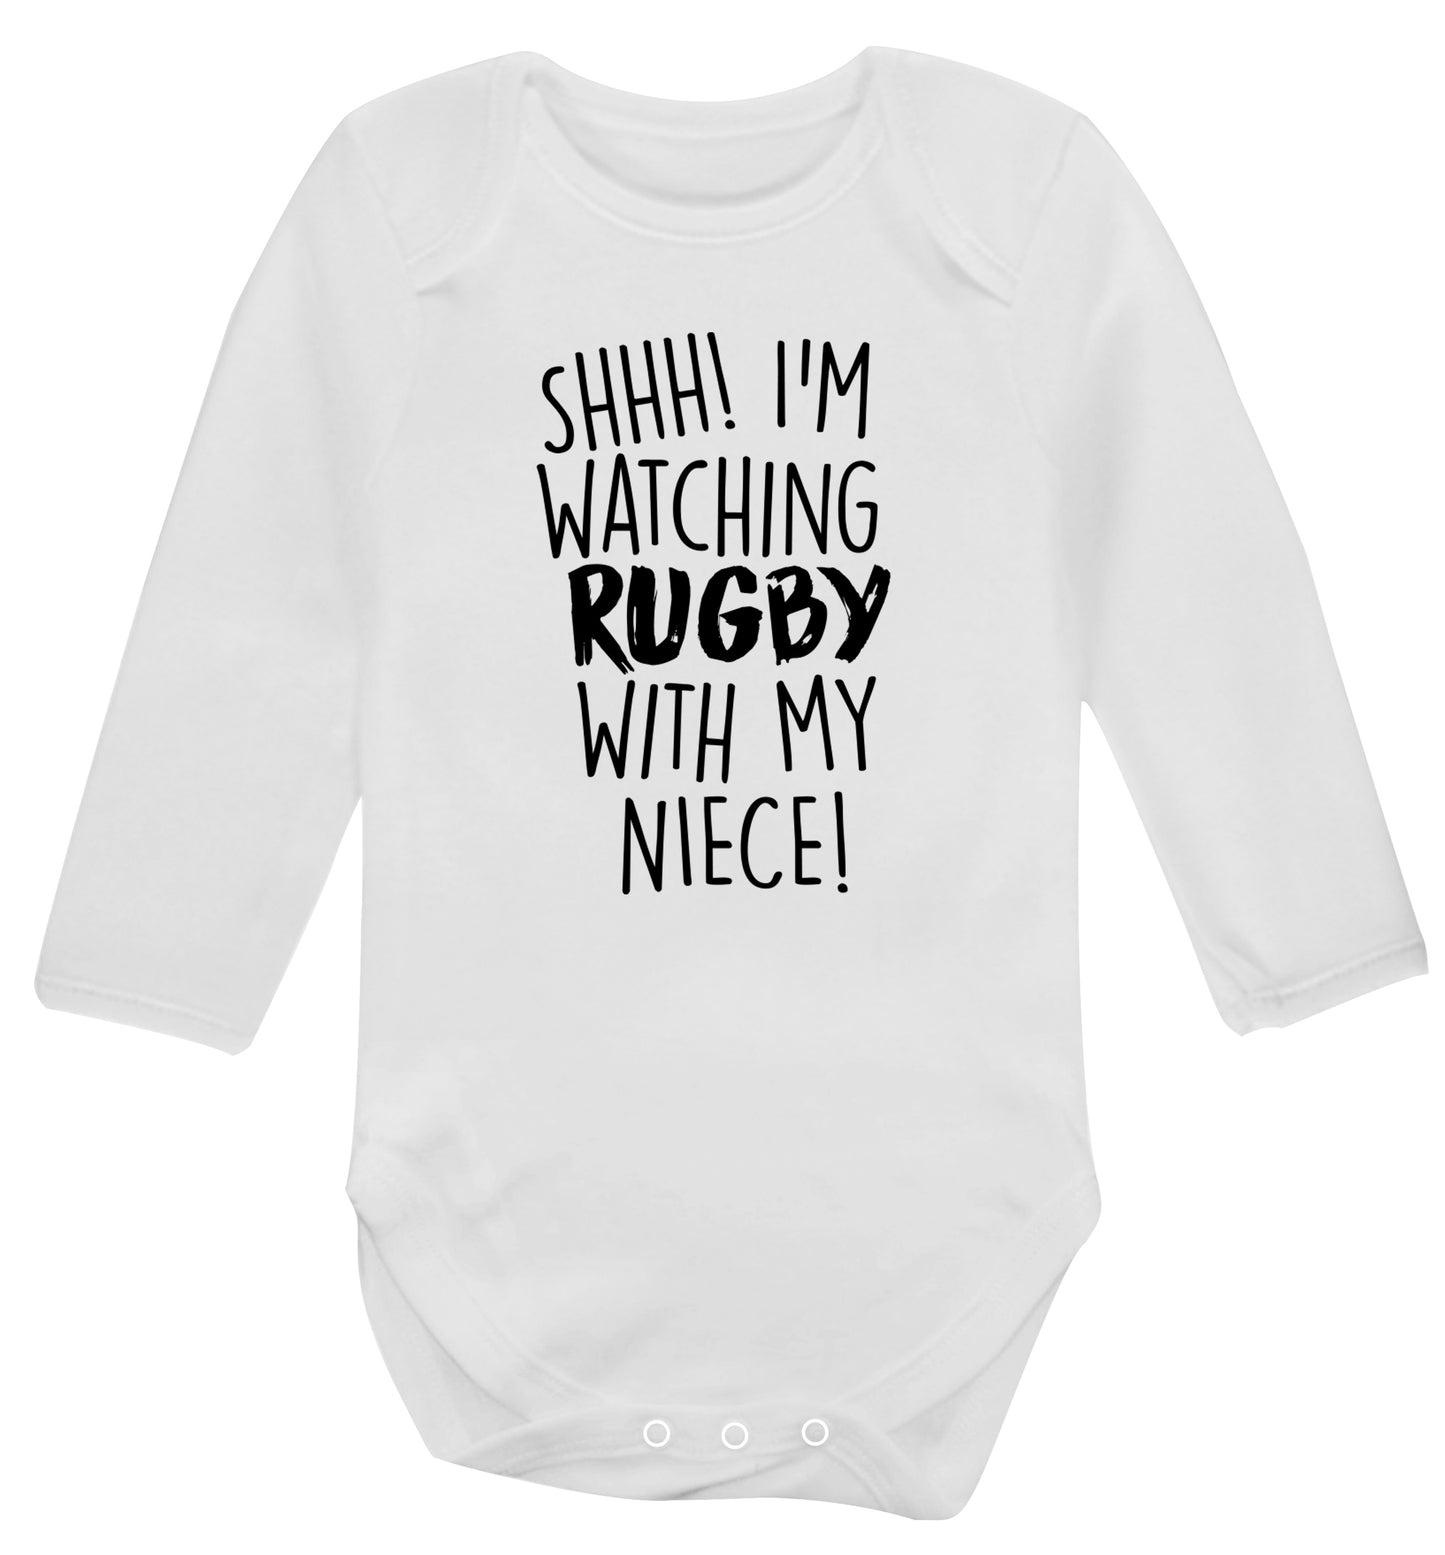 Shh.. I'm watching rugby with my niece Baby Vest long sleeved white 6-12 months